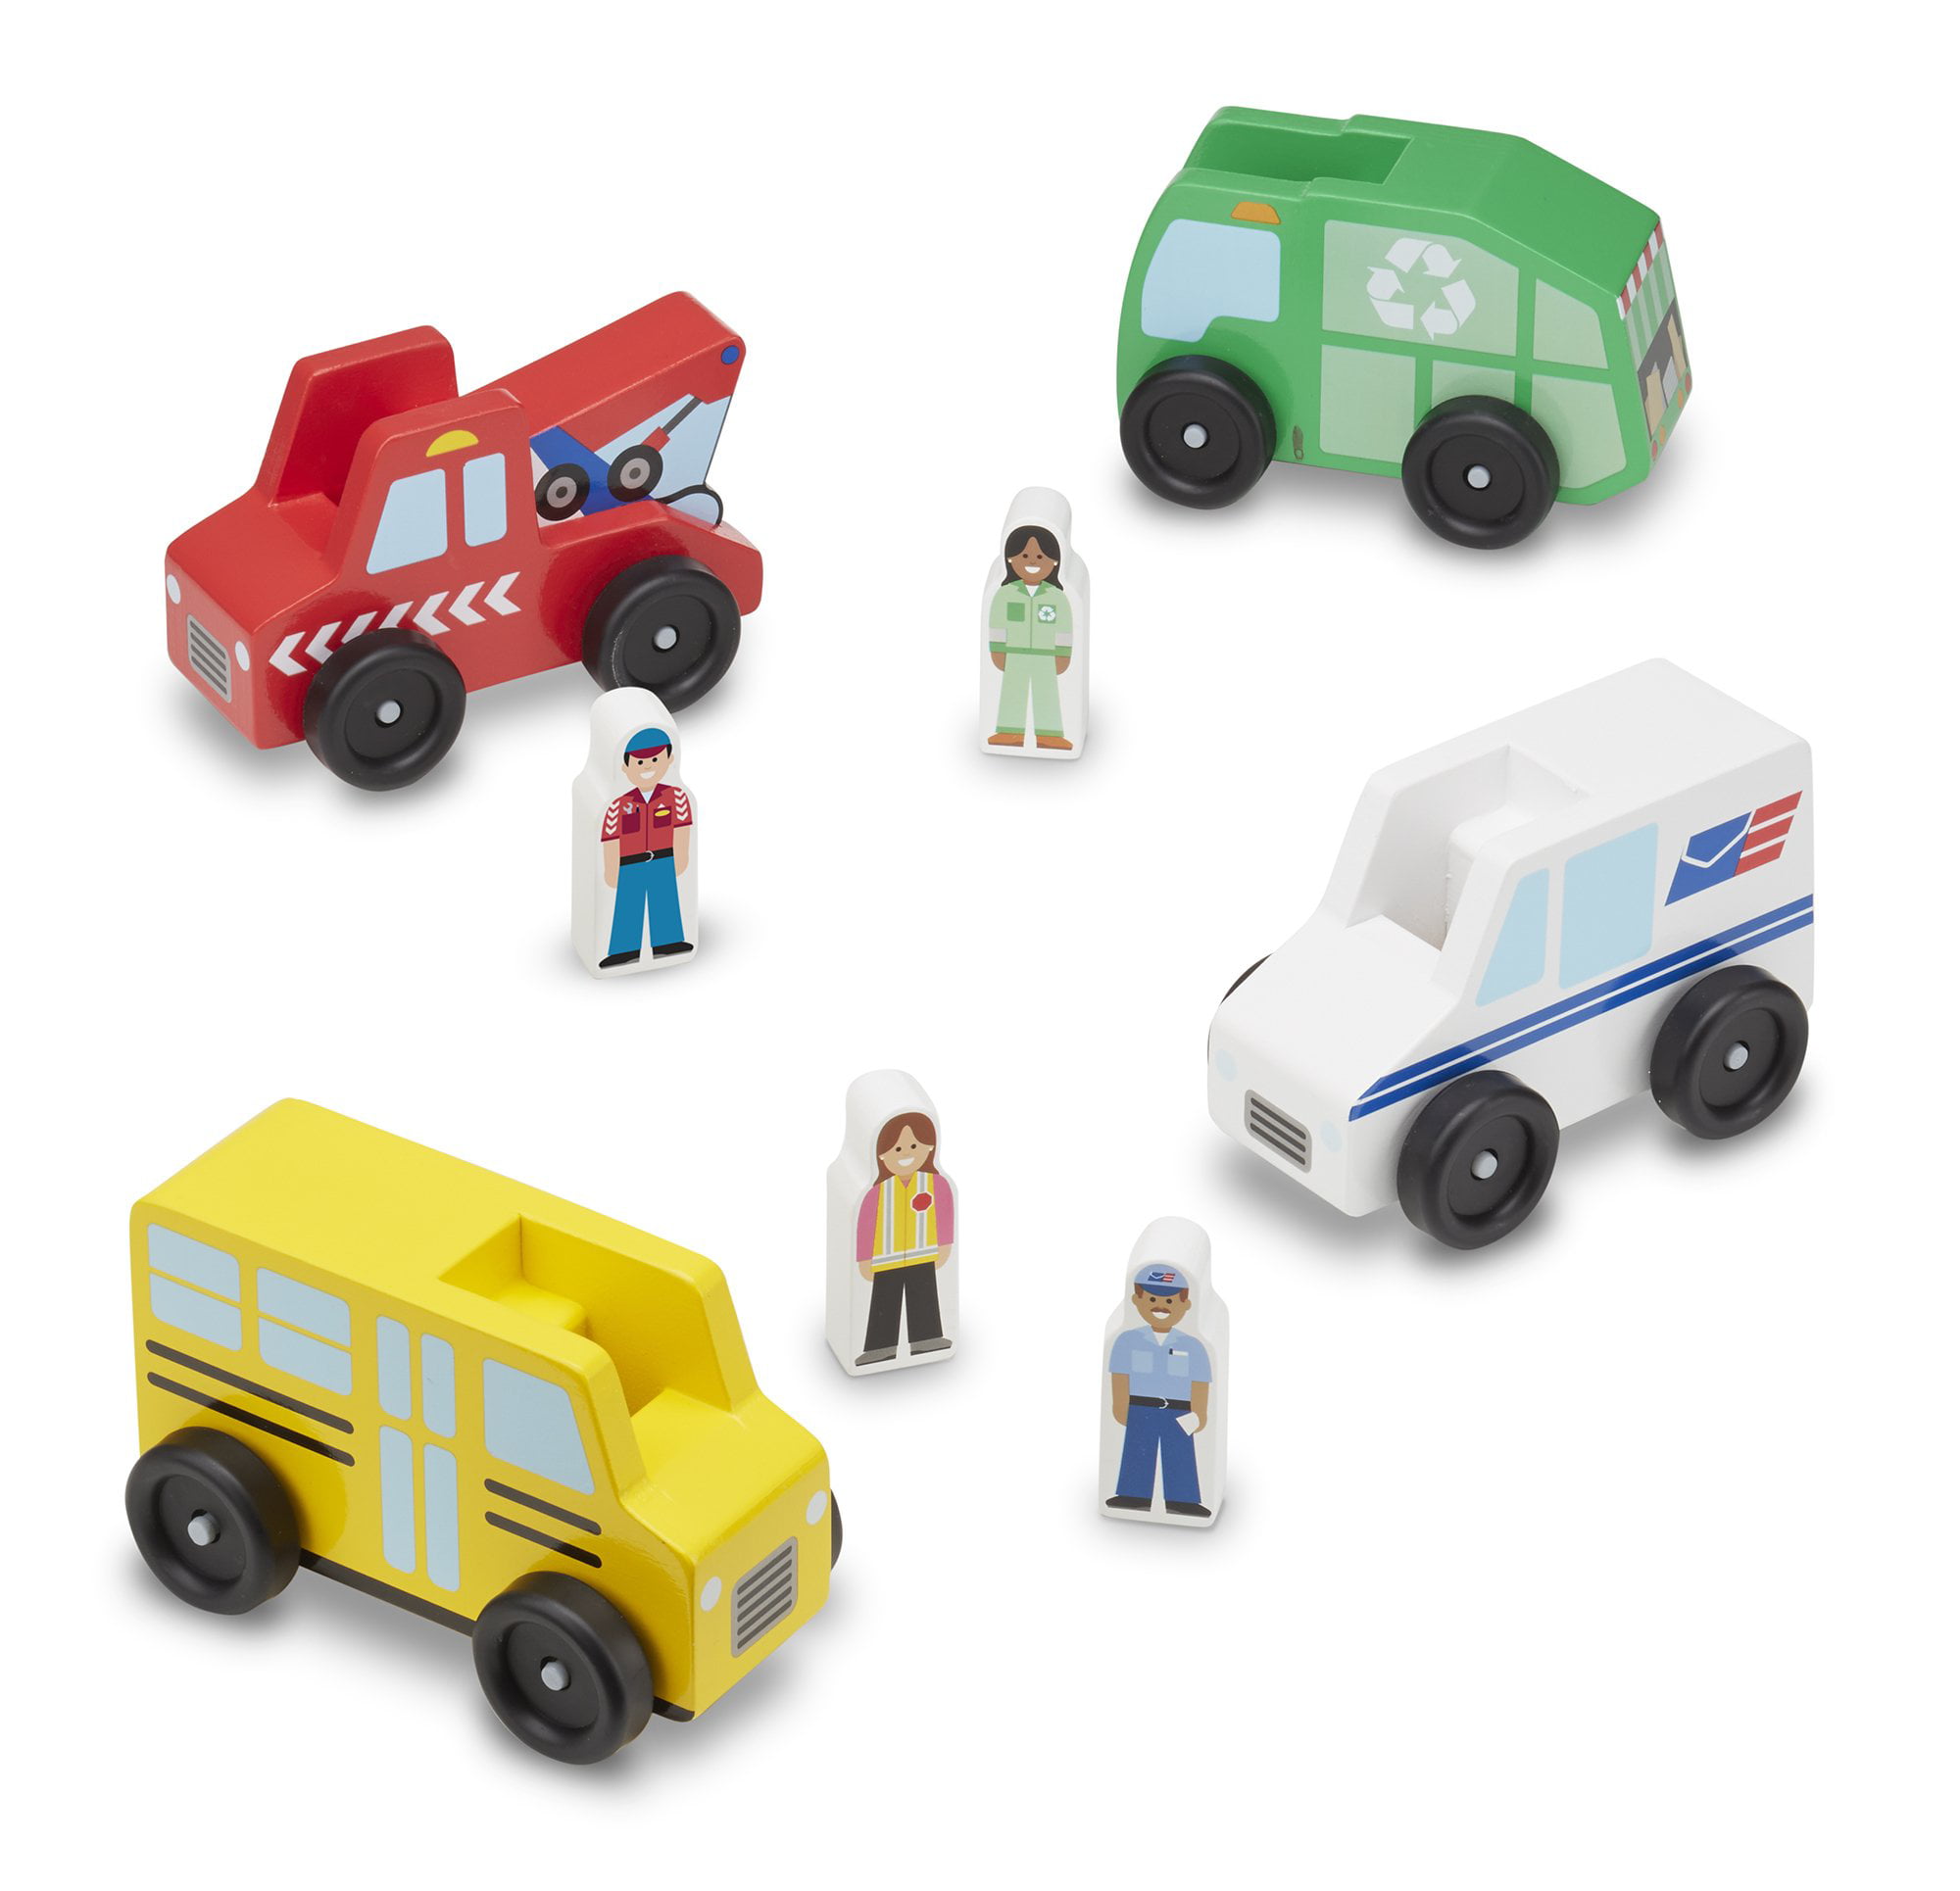 Melissa And Doug Community Vehicles Play Set Classic Wooden Toy With 4